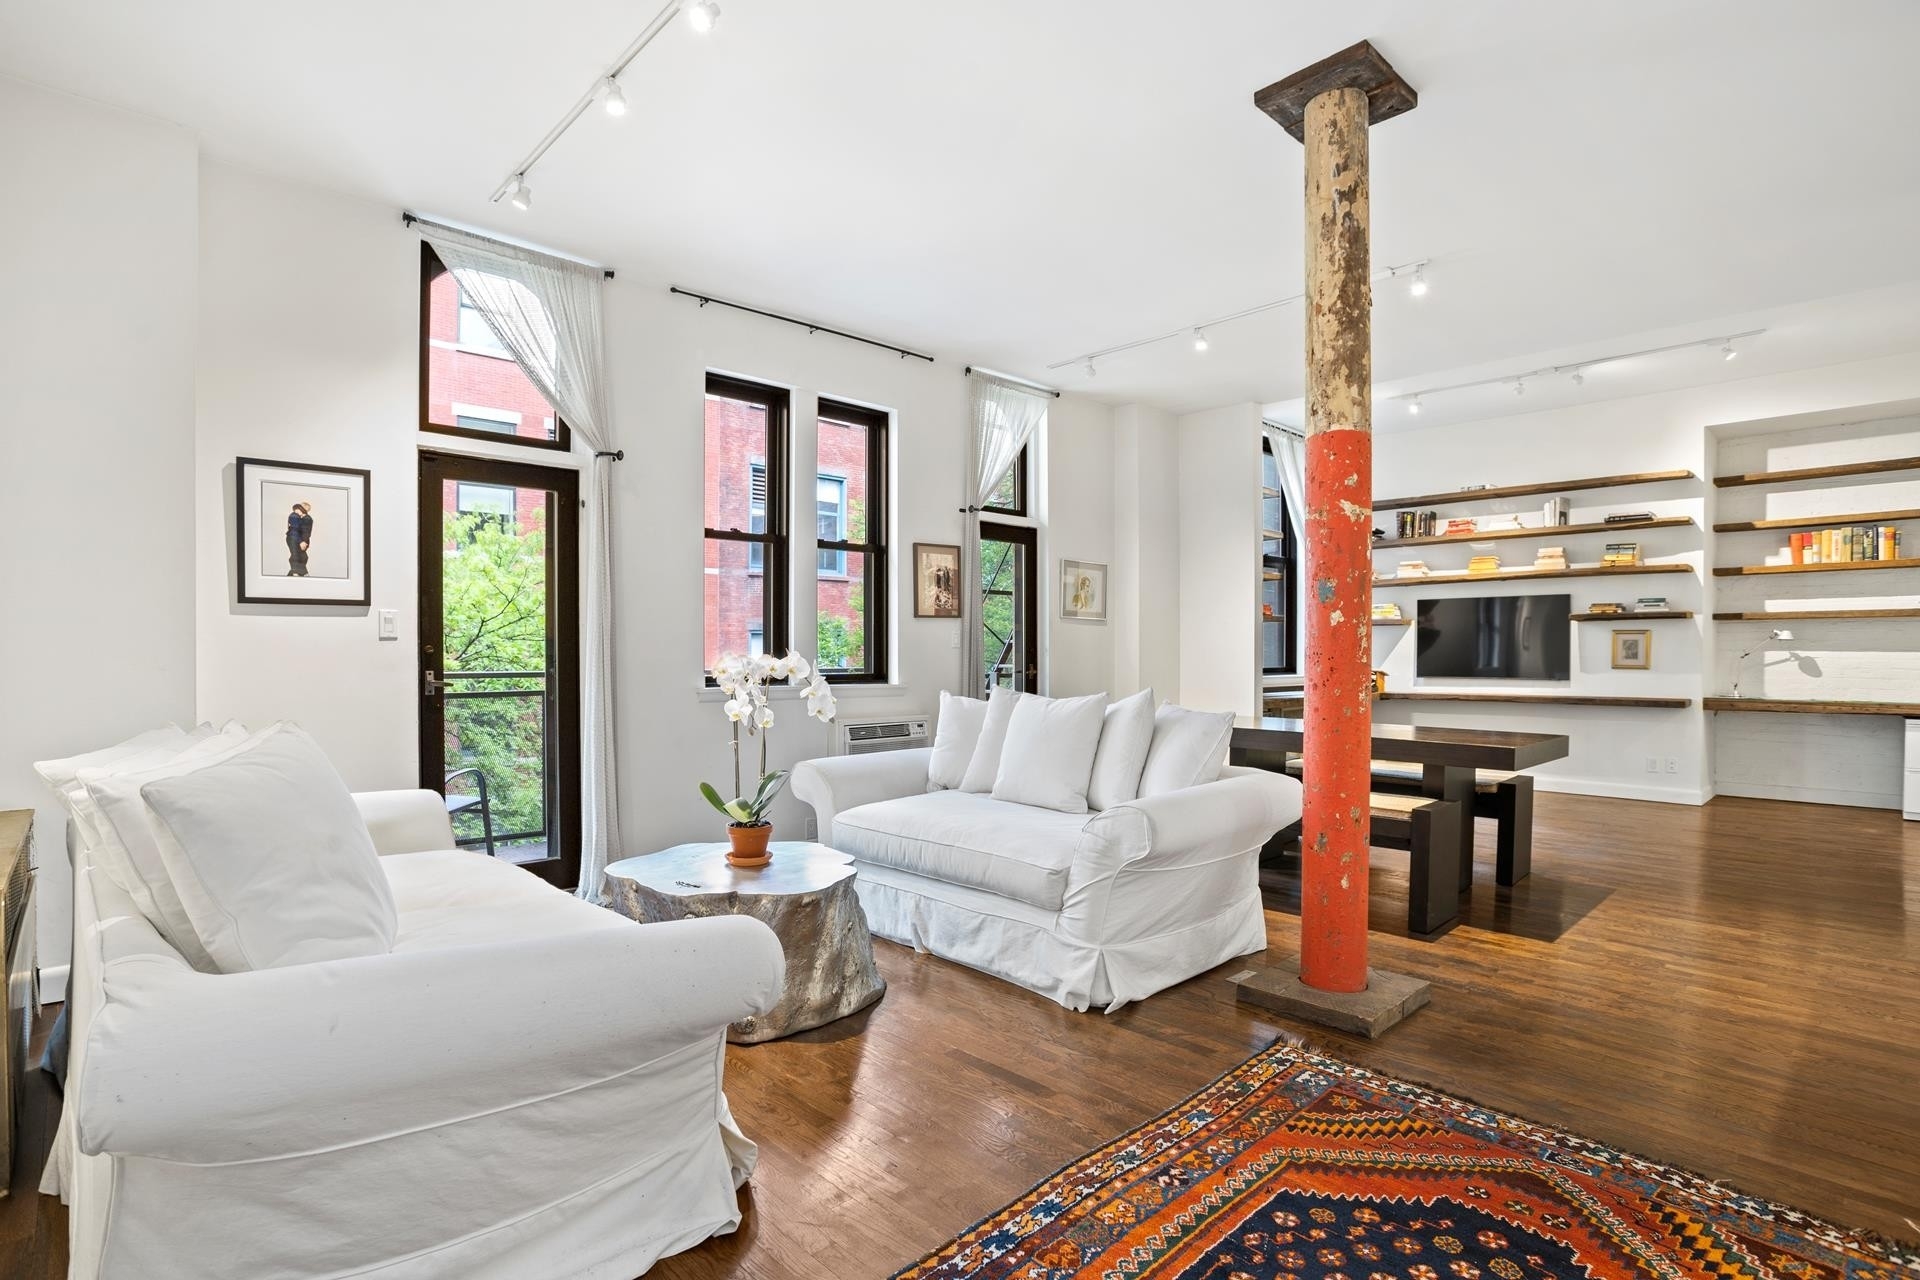 Co-op Properties for Sale at Bakery Building, 42 W 13TH ST, 4FG Greenwich Village, New York, New York 10011